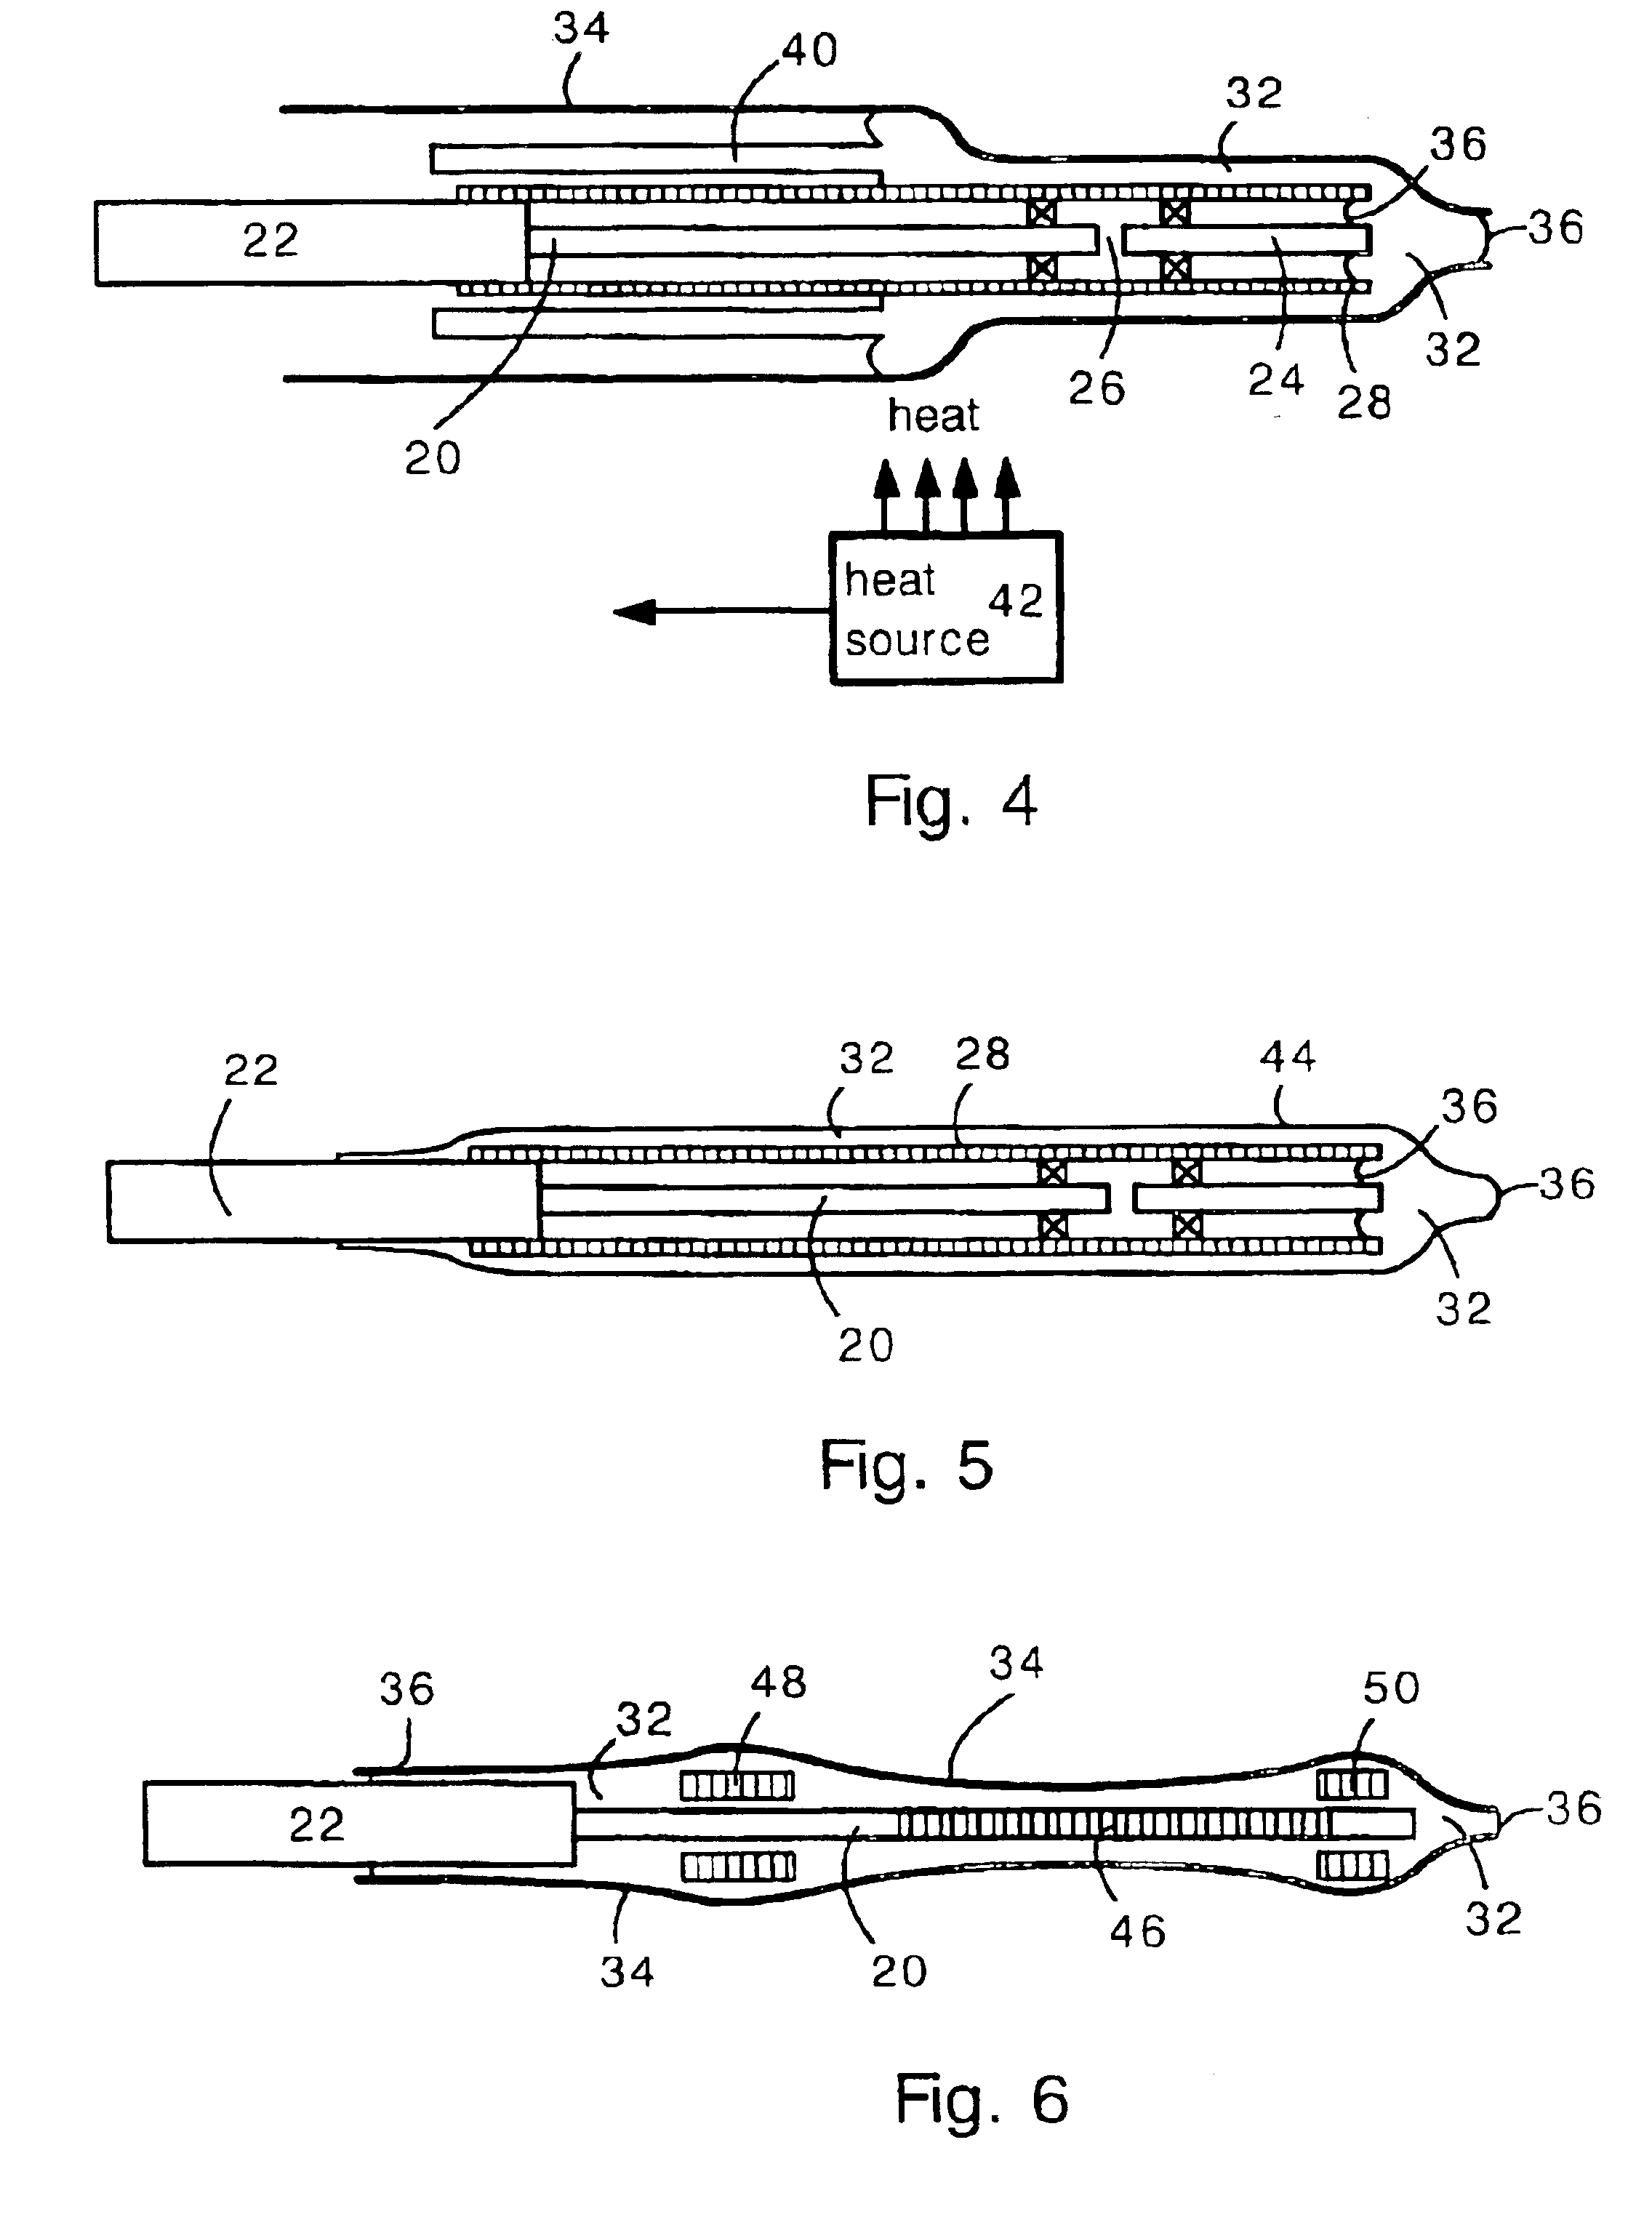 Method and apparatus for packaging optical fiber sensors for harsh environments